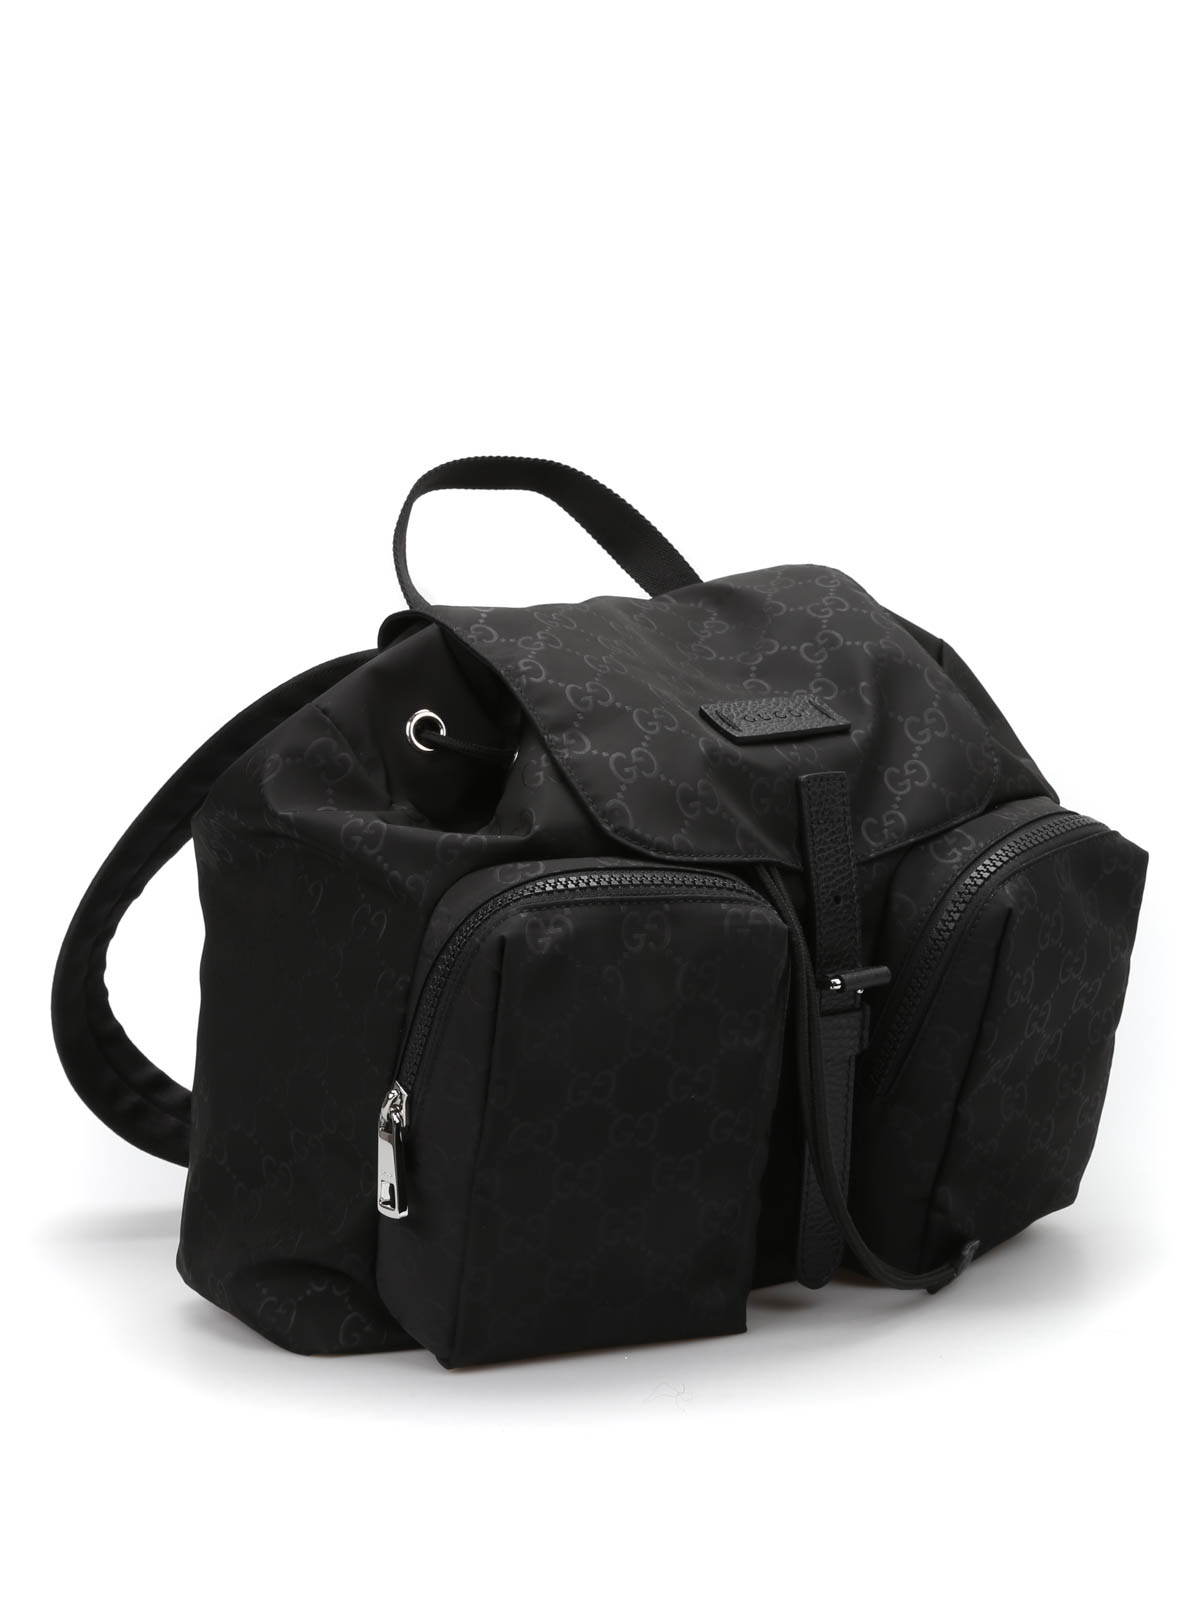 guccissima backpack